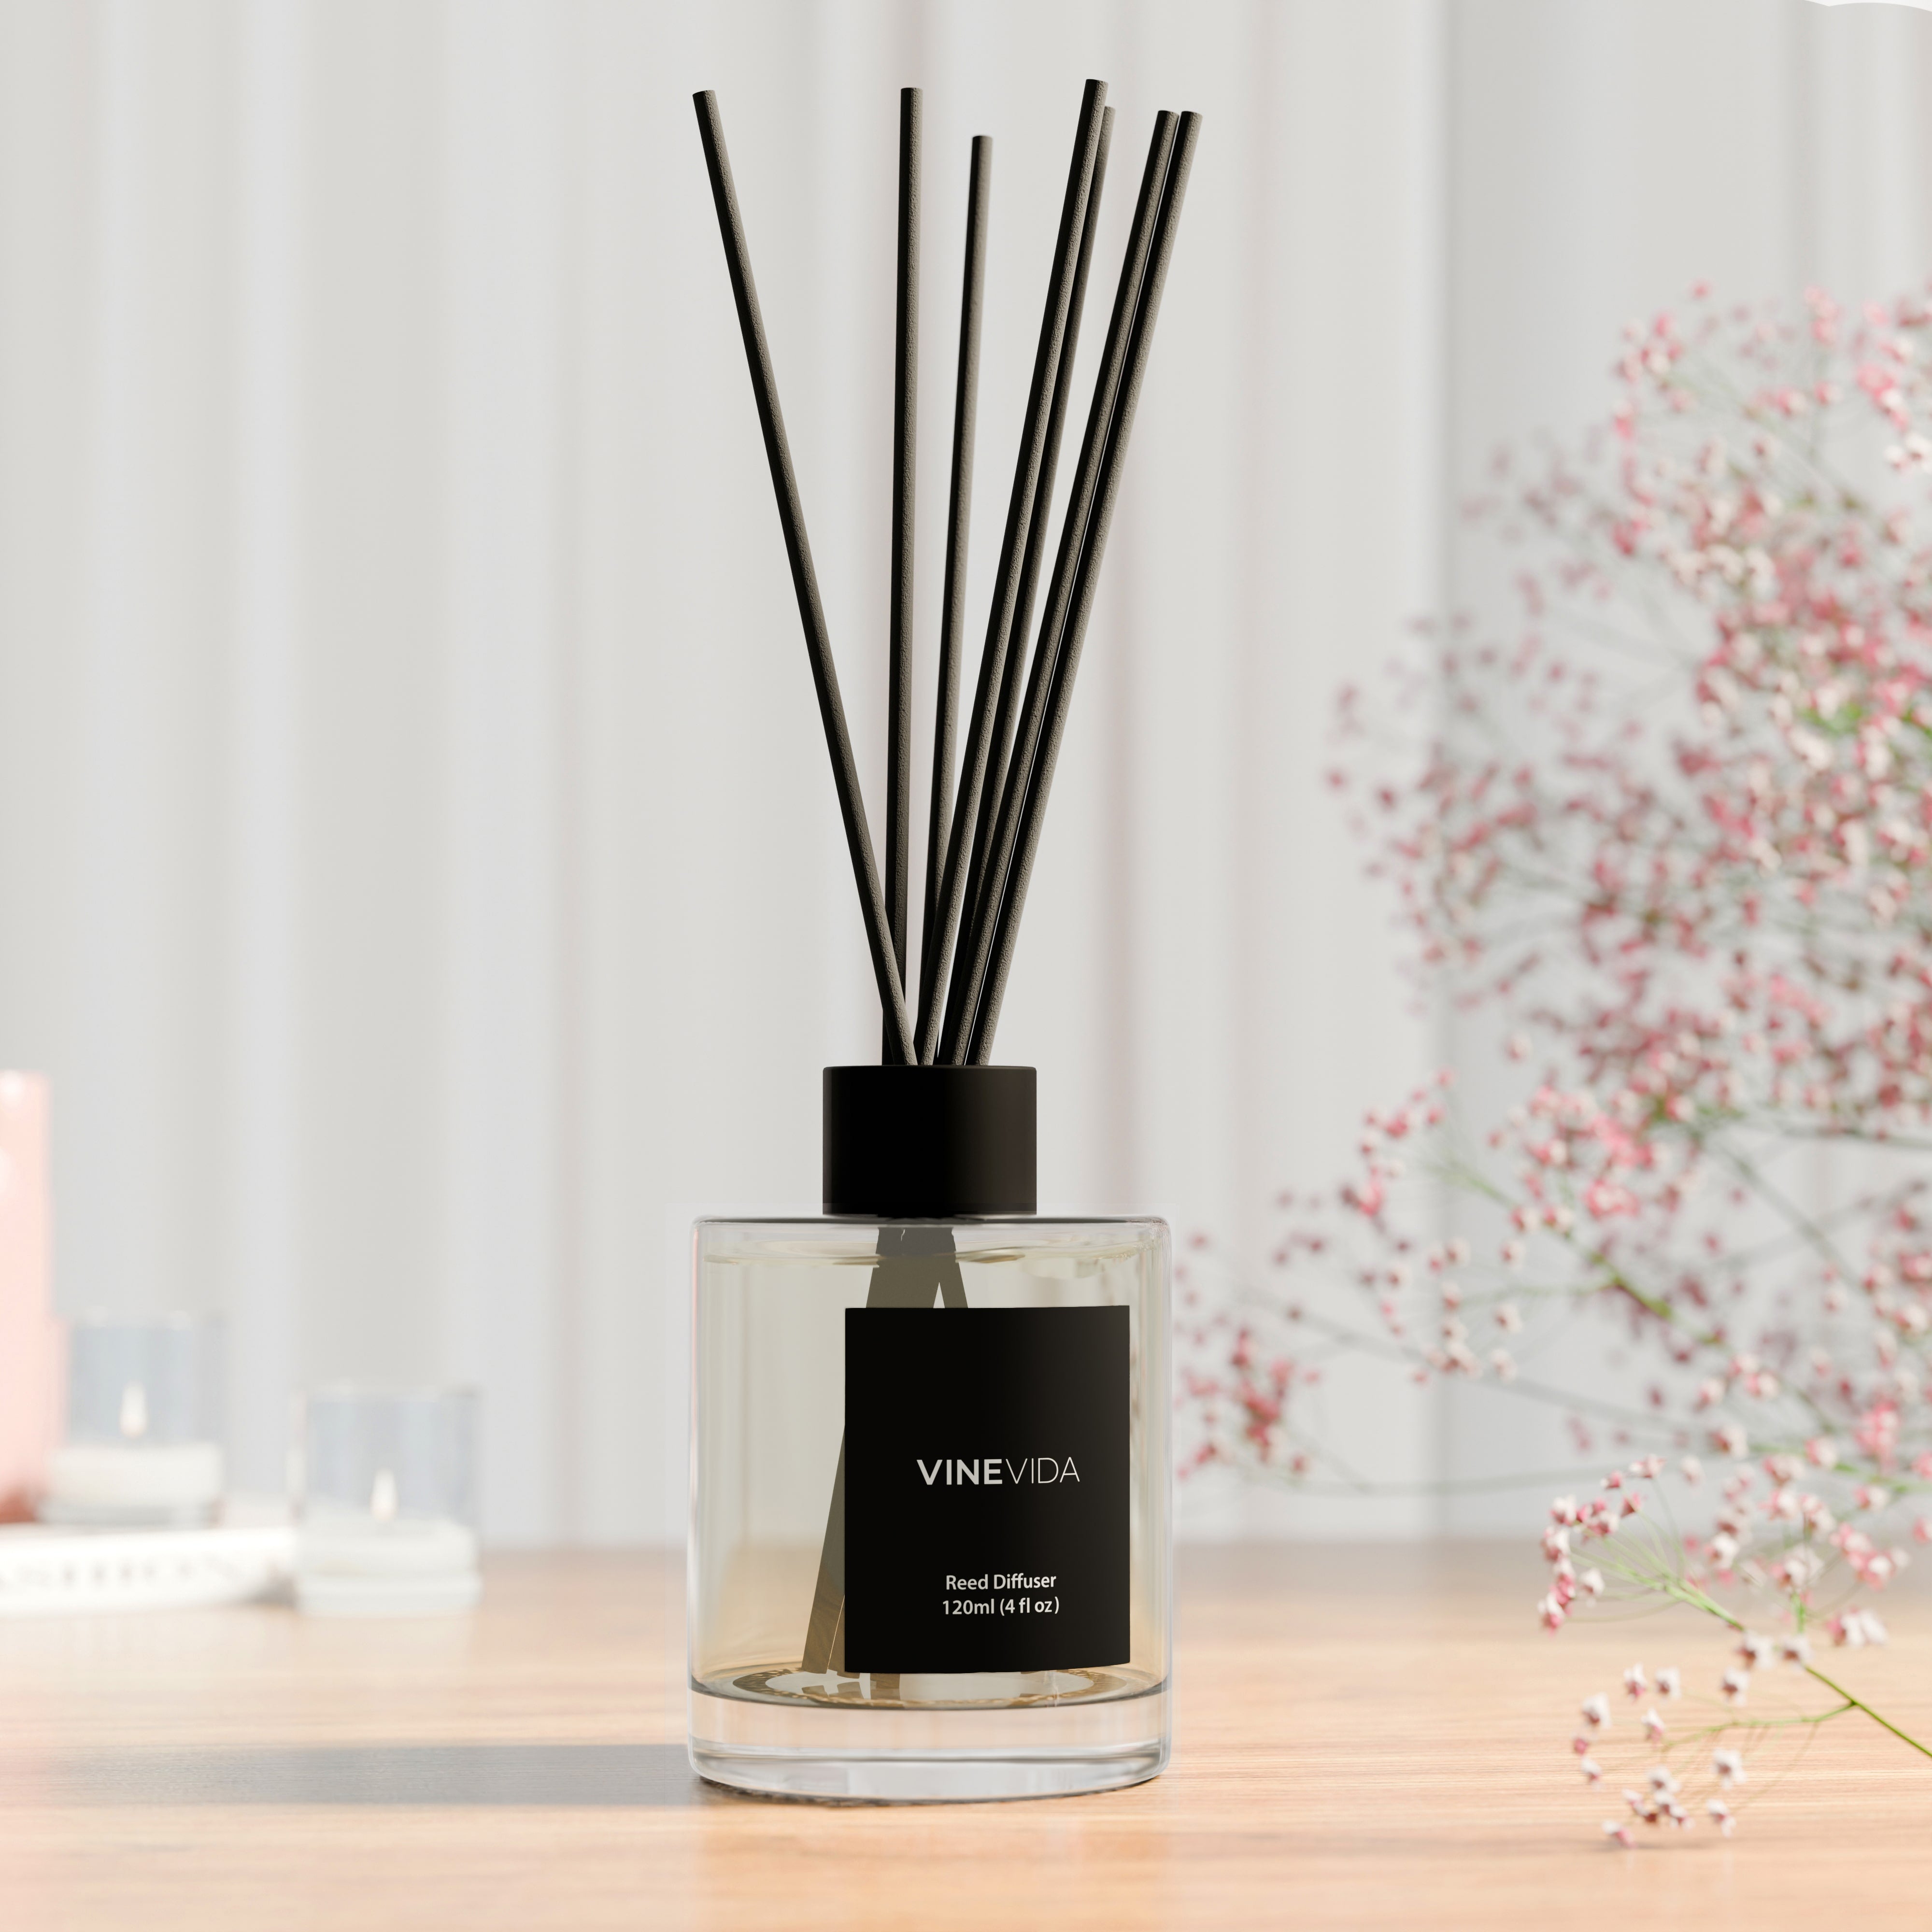 NO. 2000 Reed Diffuser - Inspired by: Fierce by Abercrombie & Fitch